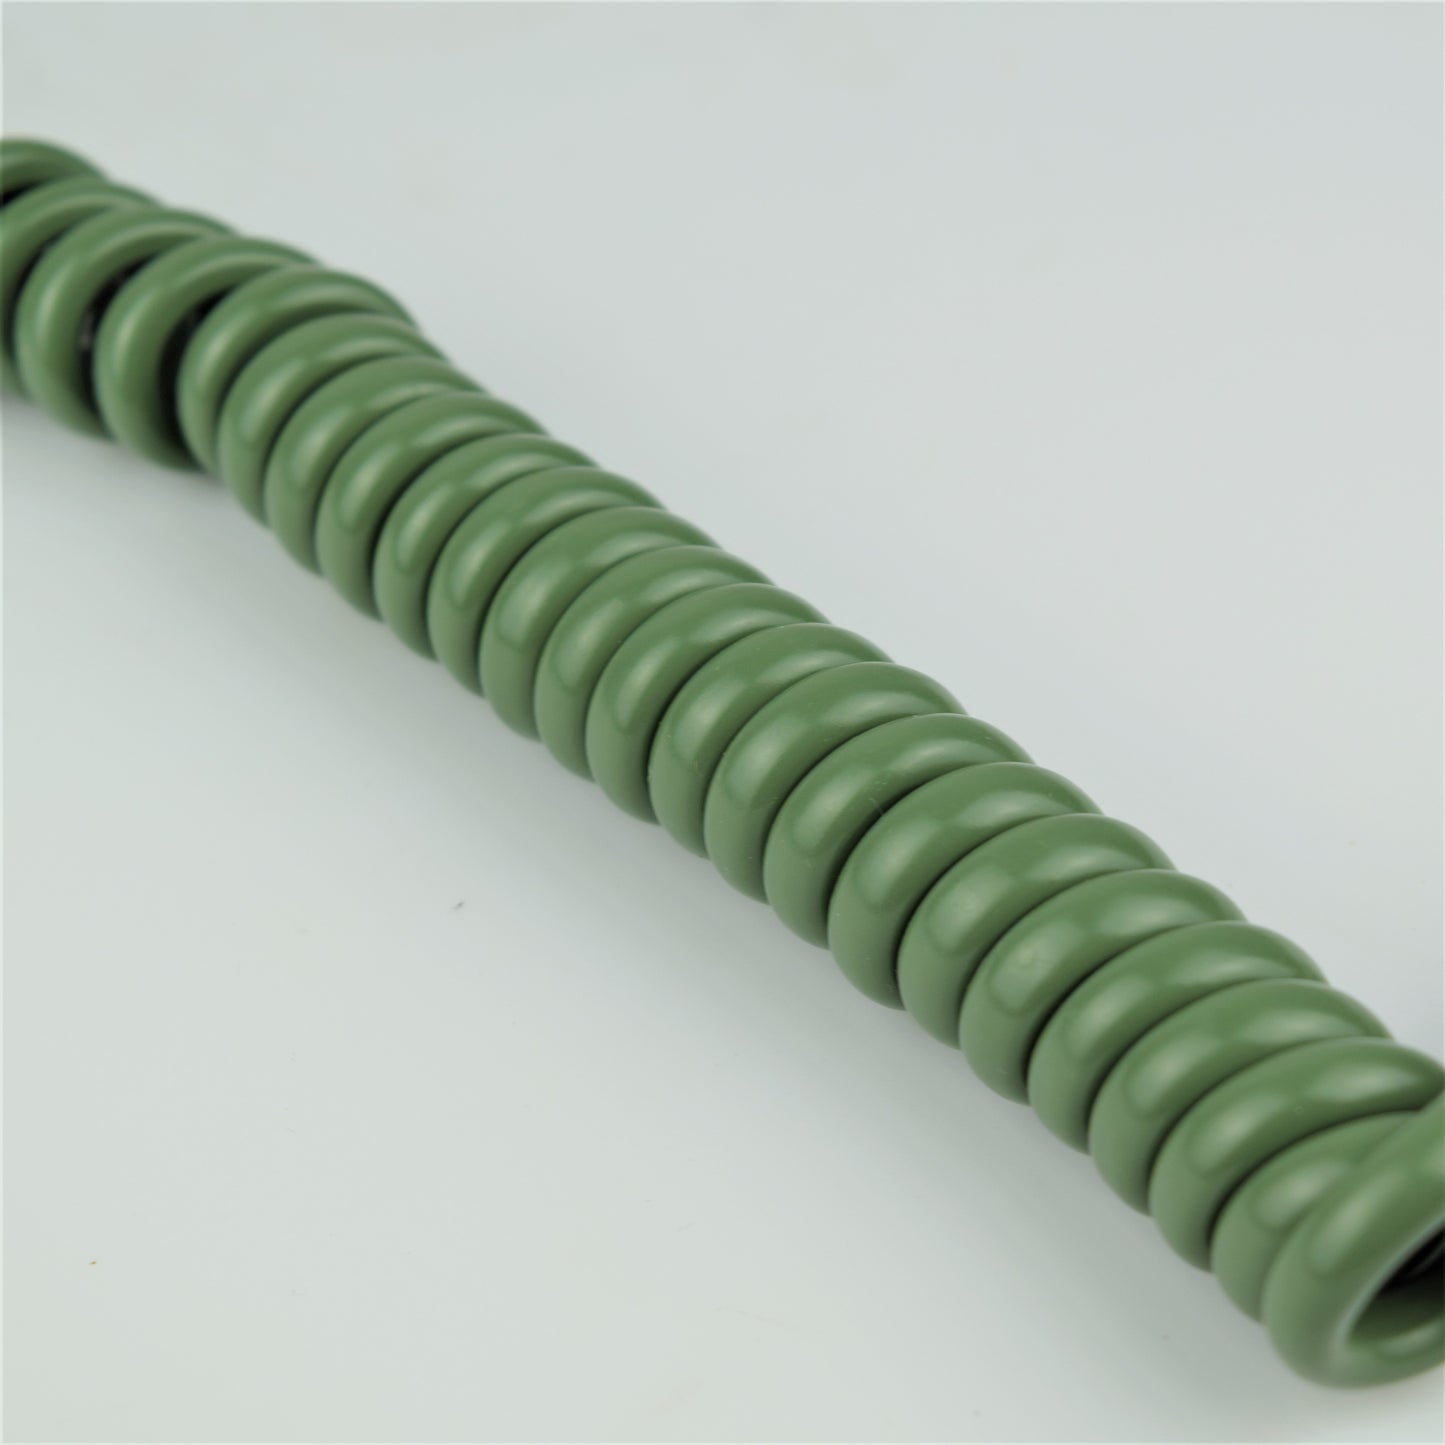 Cord - Handset - Green - Hardwired - 4 Conductor - Spade Terminations